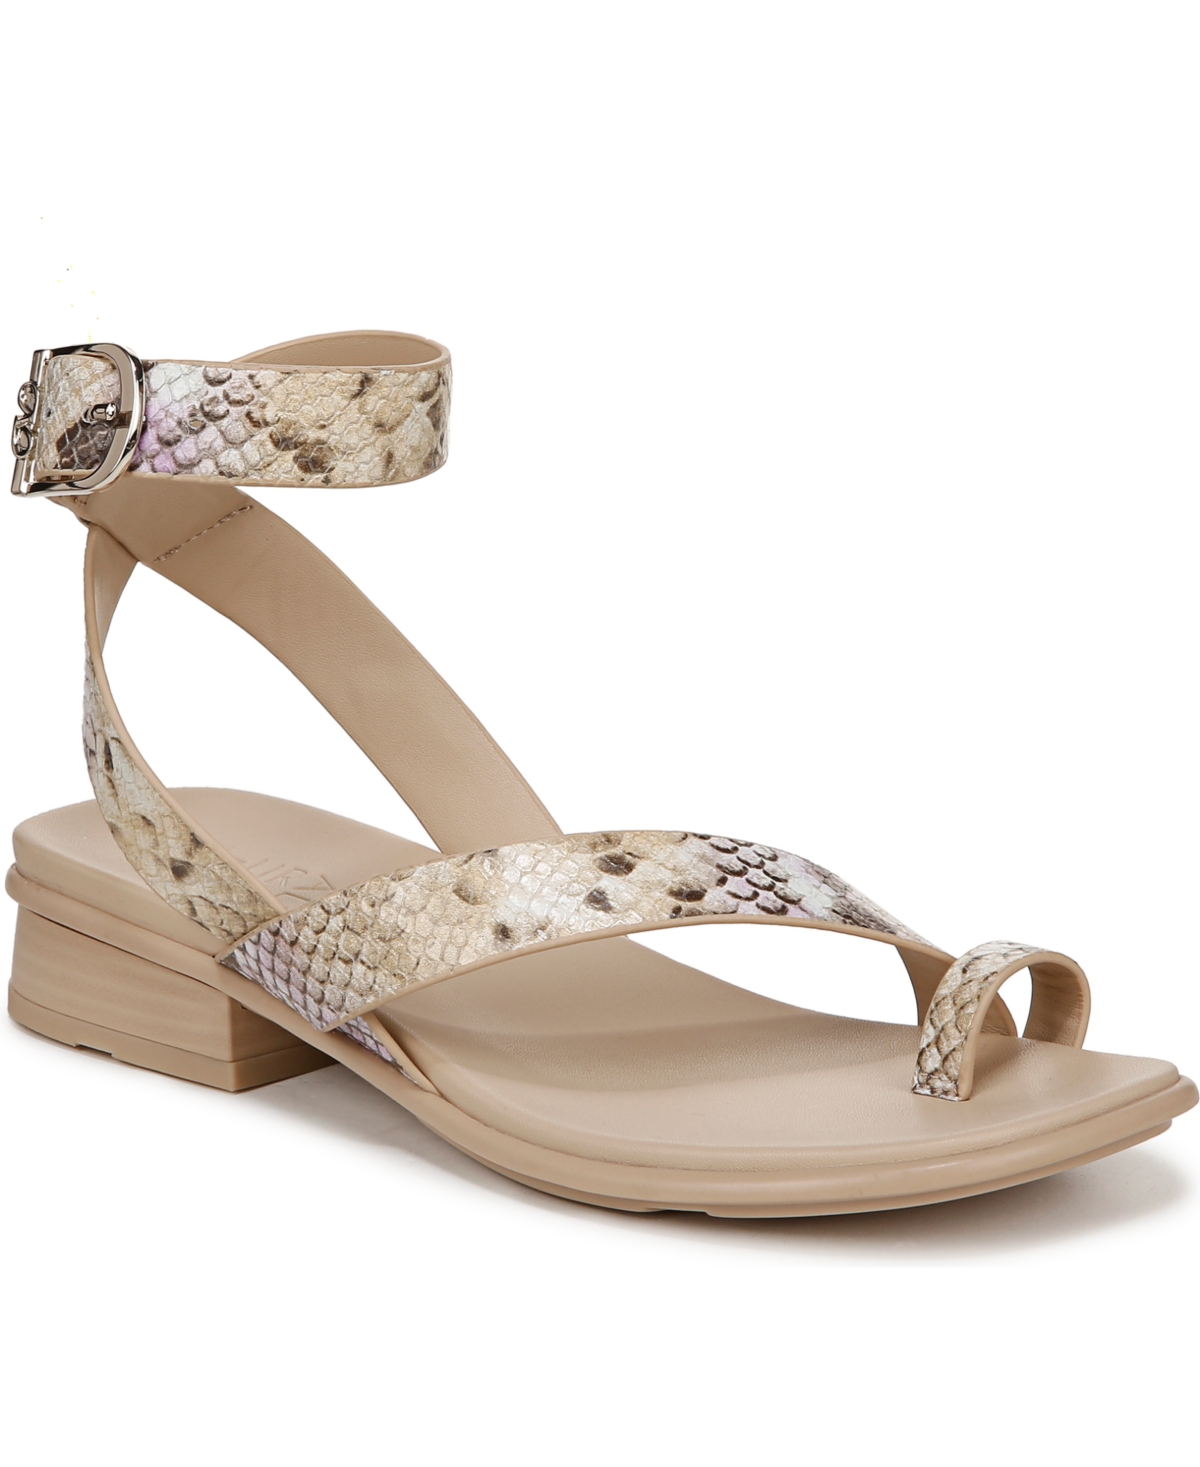 Naturalizer Birch Ankle Strap Sandals In Tan,lilac Snake Print Leather